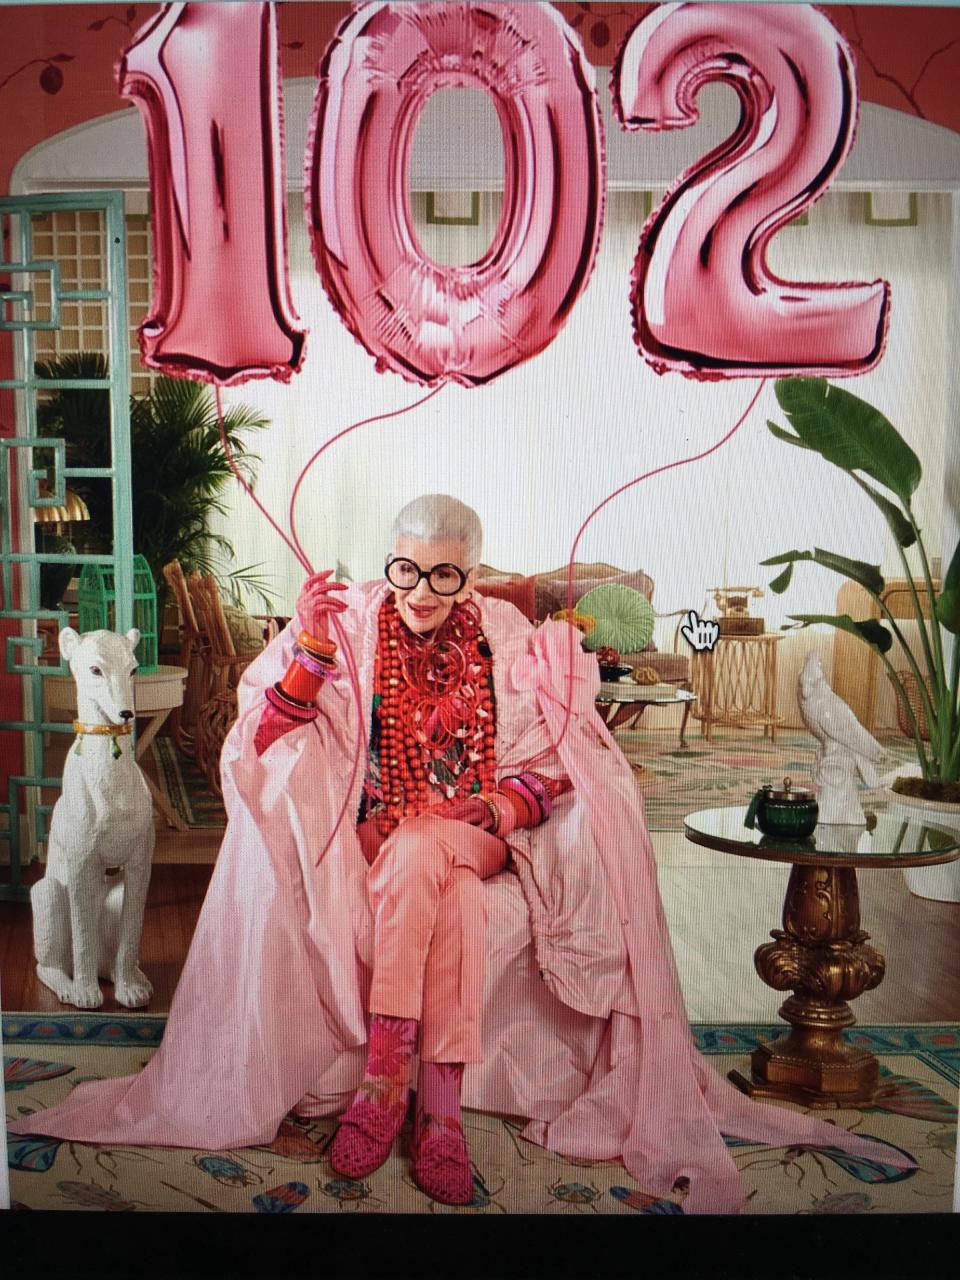 Iris Apfel, head-to-toe in Barbie pink for her 102nd birthday on Aug. 29